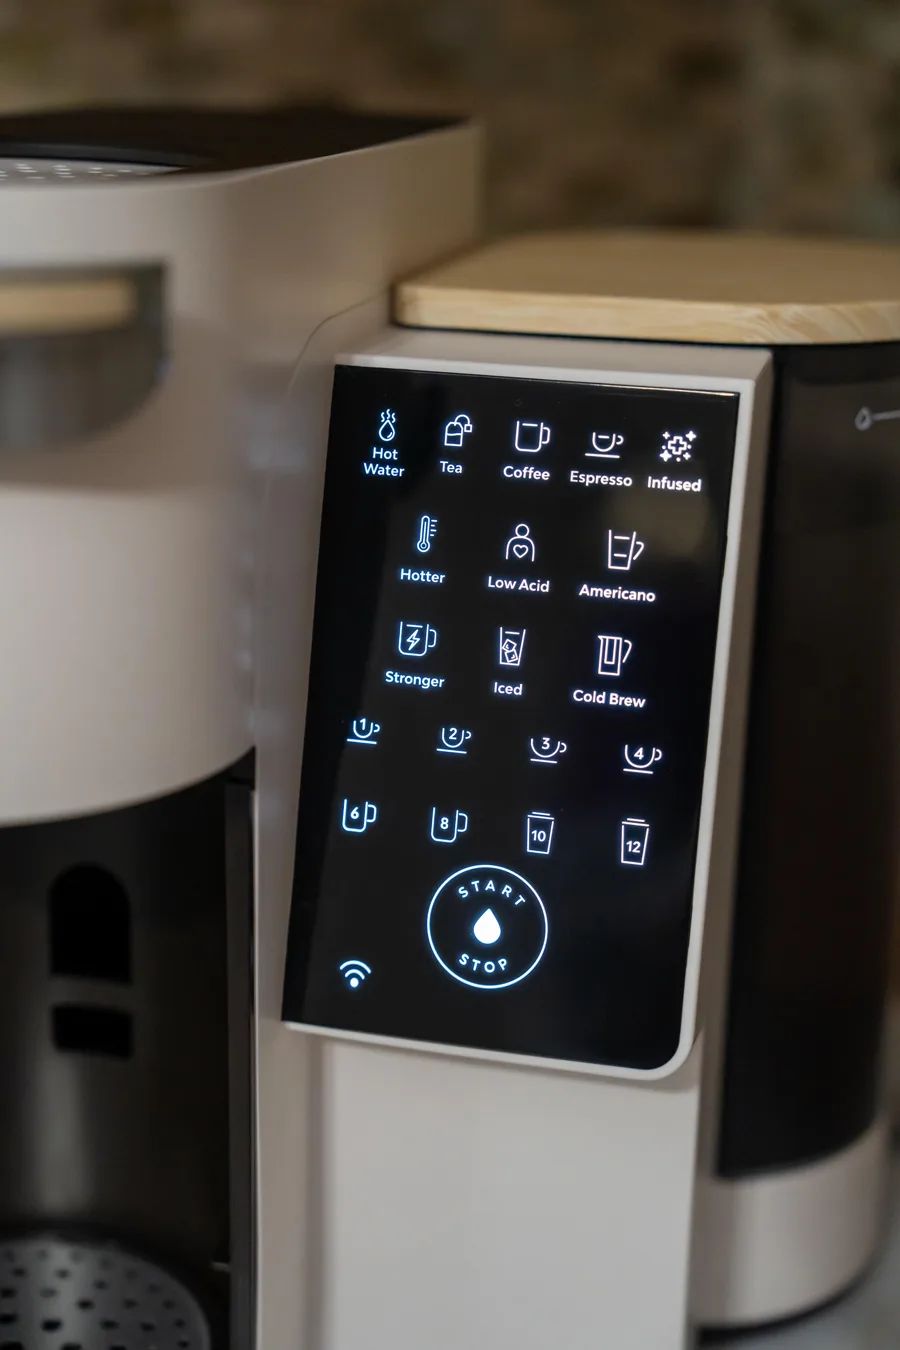 Bruvi touchscreen showcasing the customized coffee features